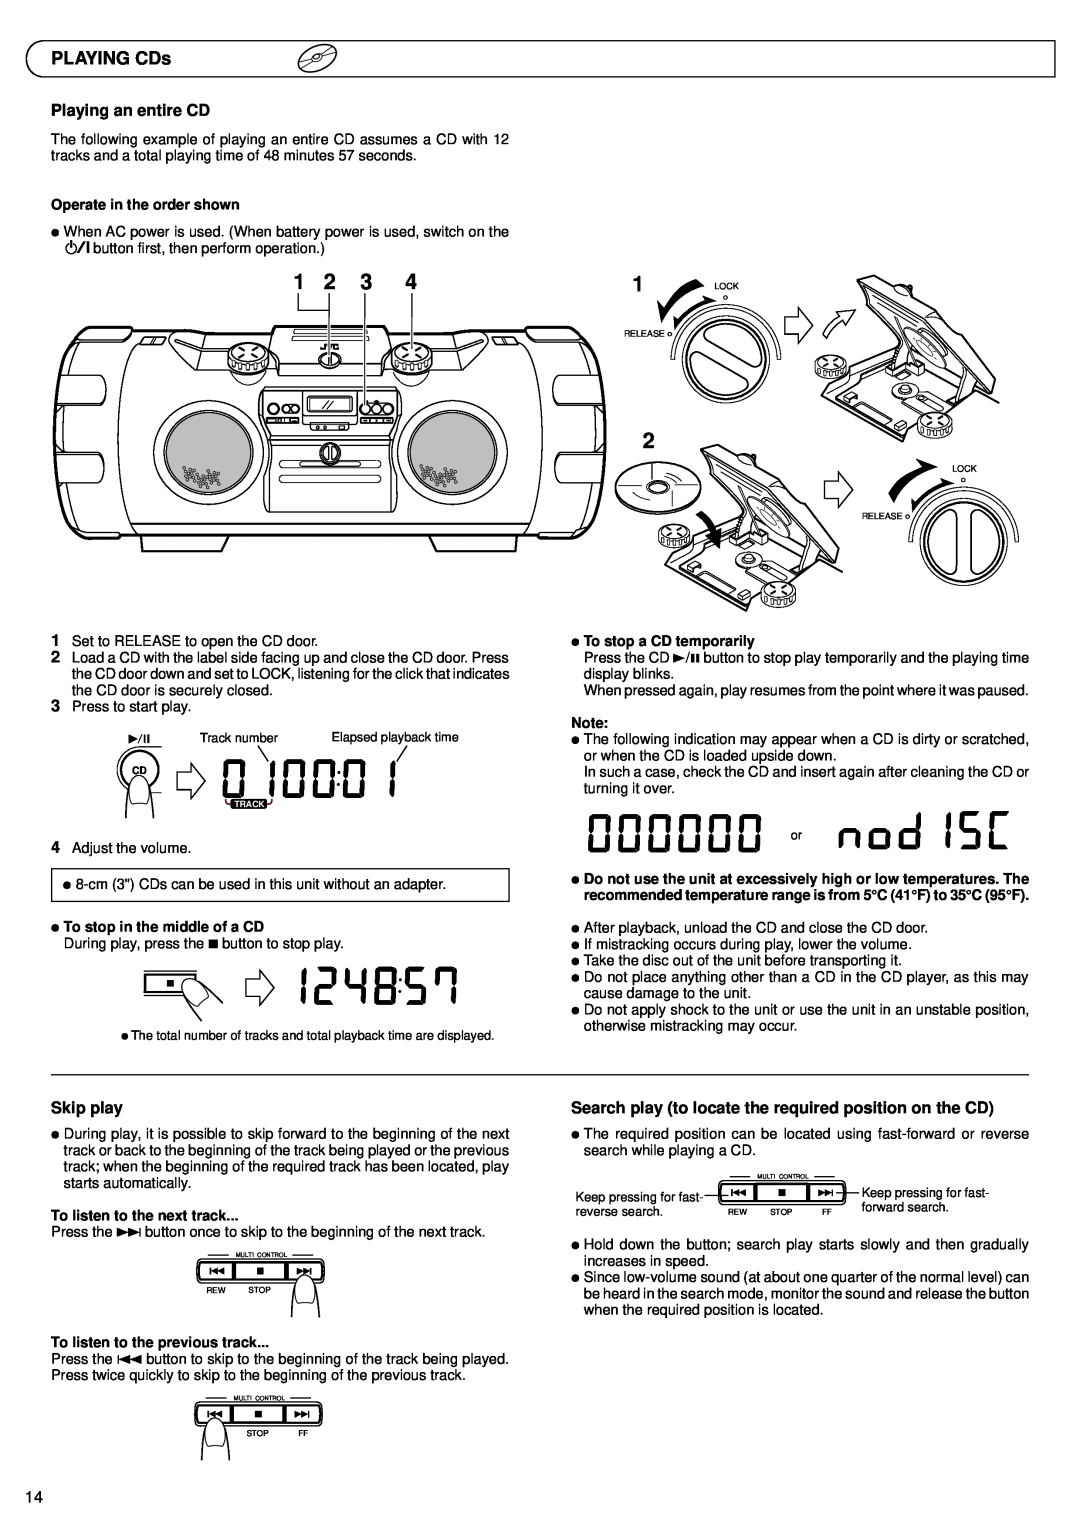 JVC RV-B99 BK/BU manual PLAYING CDs, Operate in the order shown, ÖTo stop in the middle of a CD, ÖTo stop a CD temporarily 